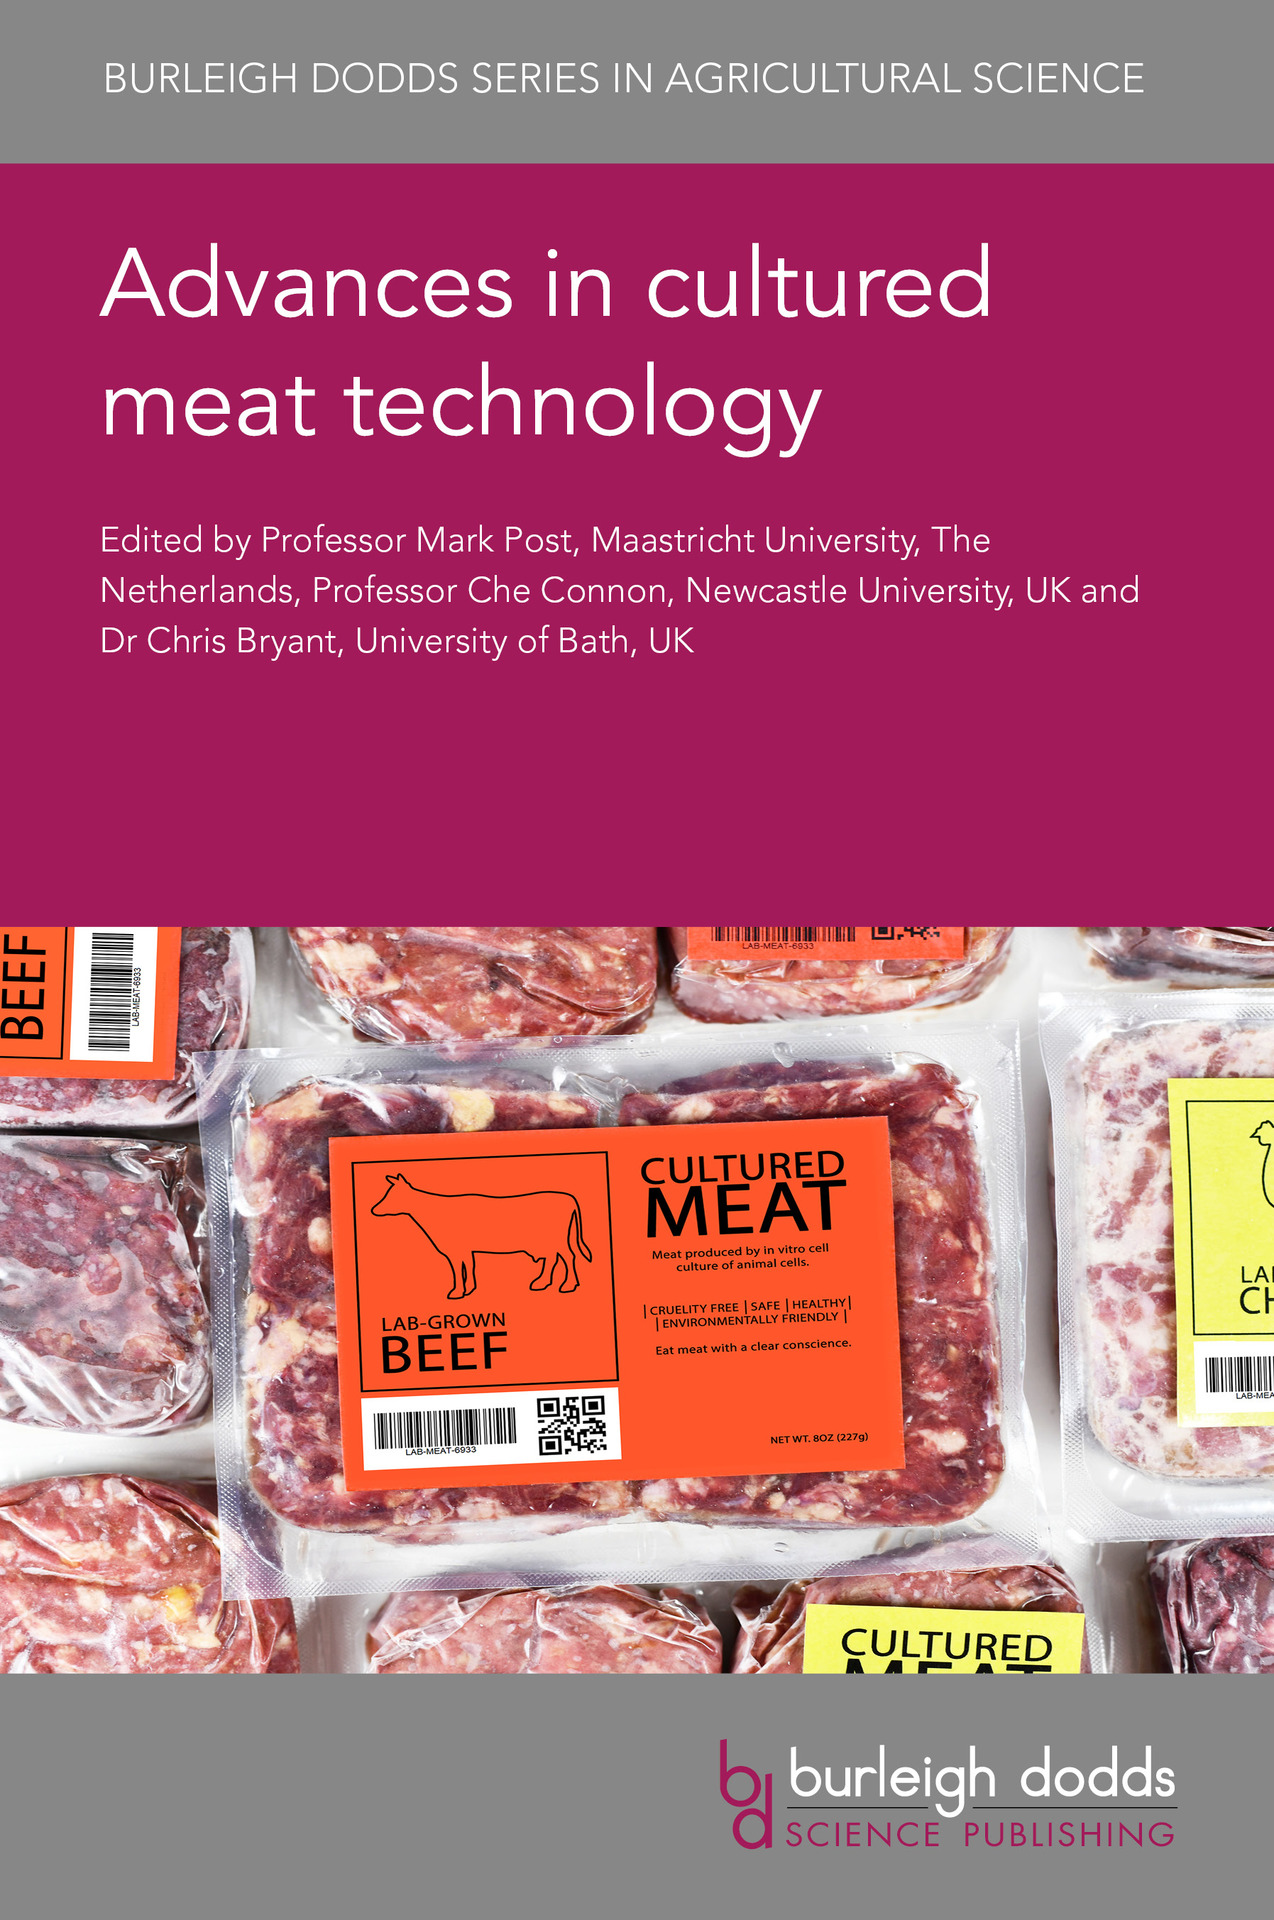 image showing a packet of cultured meat